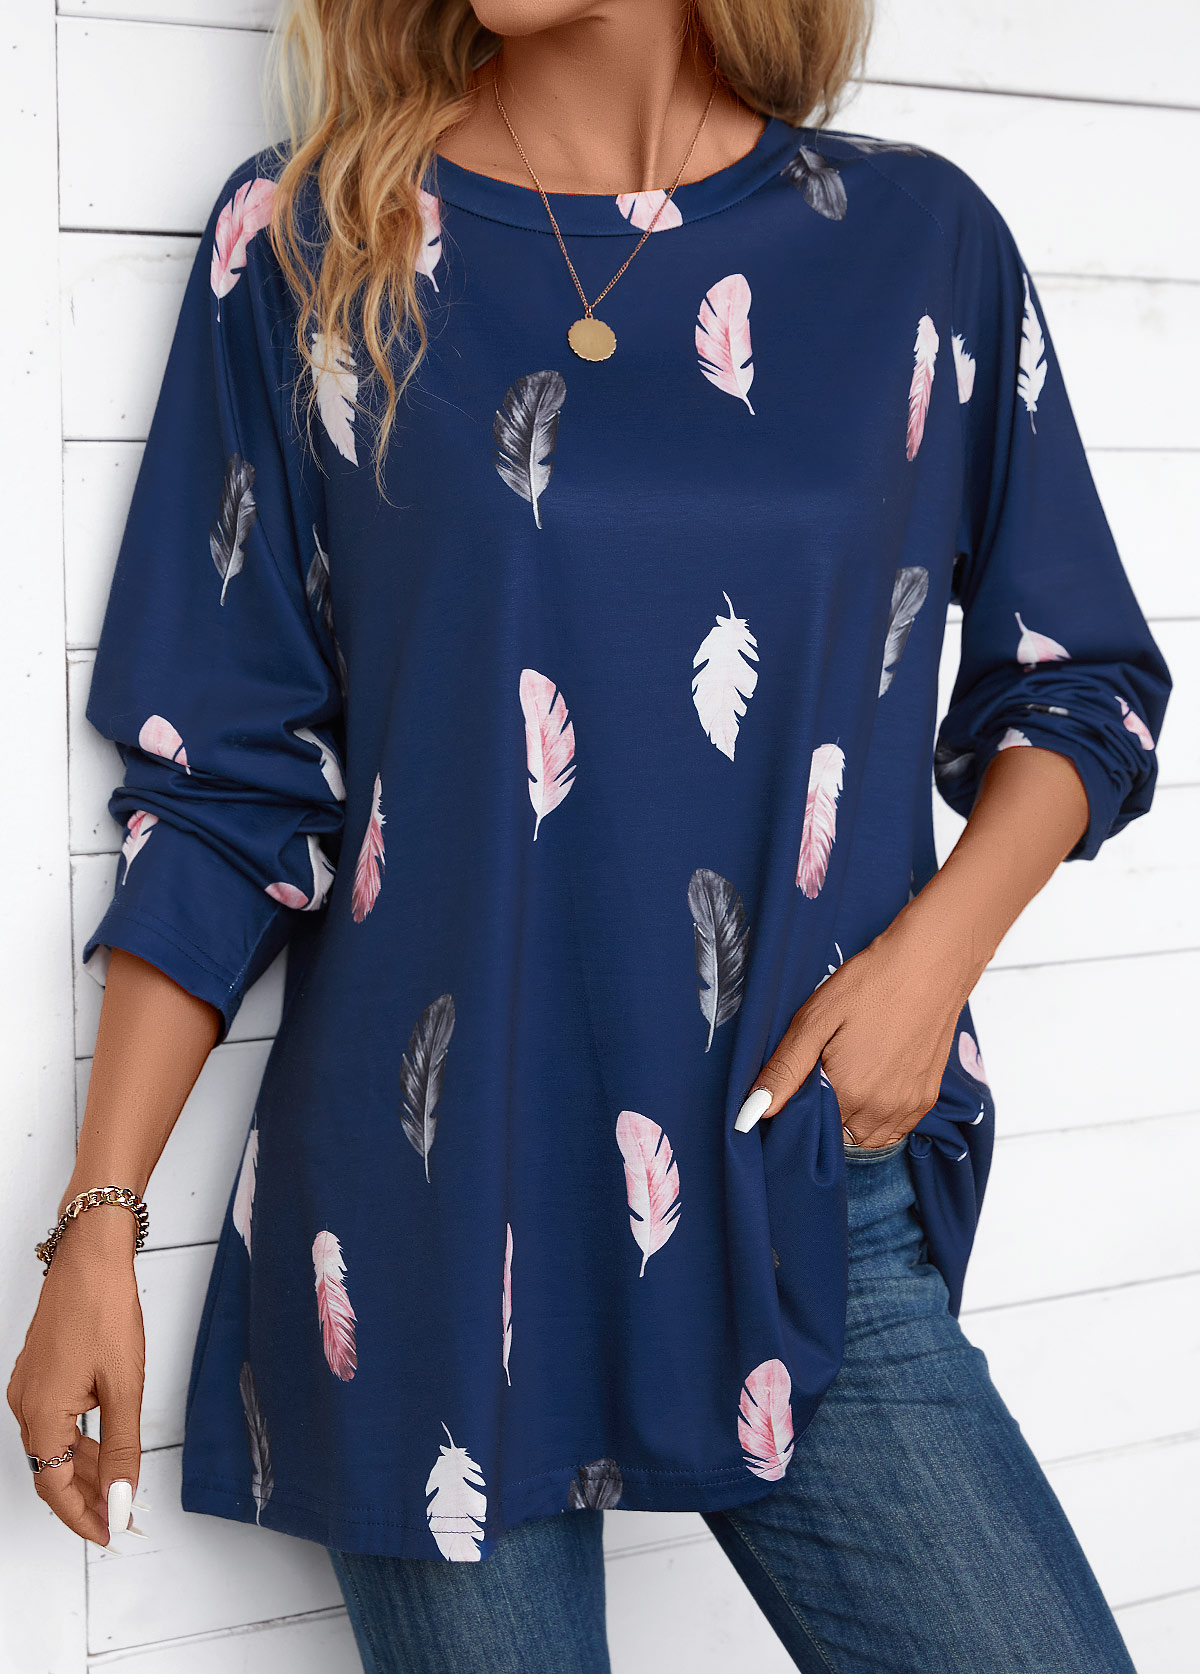 Feathers Print Navy Round Neck Extra Long Sleeve Blouse